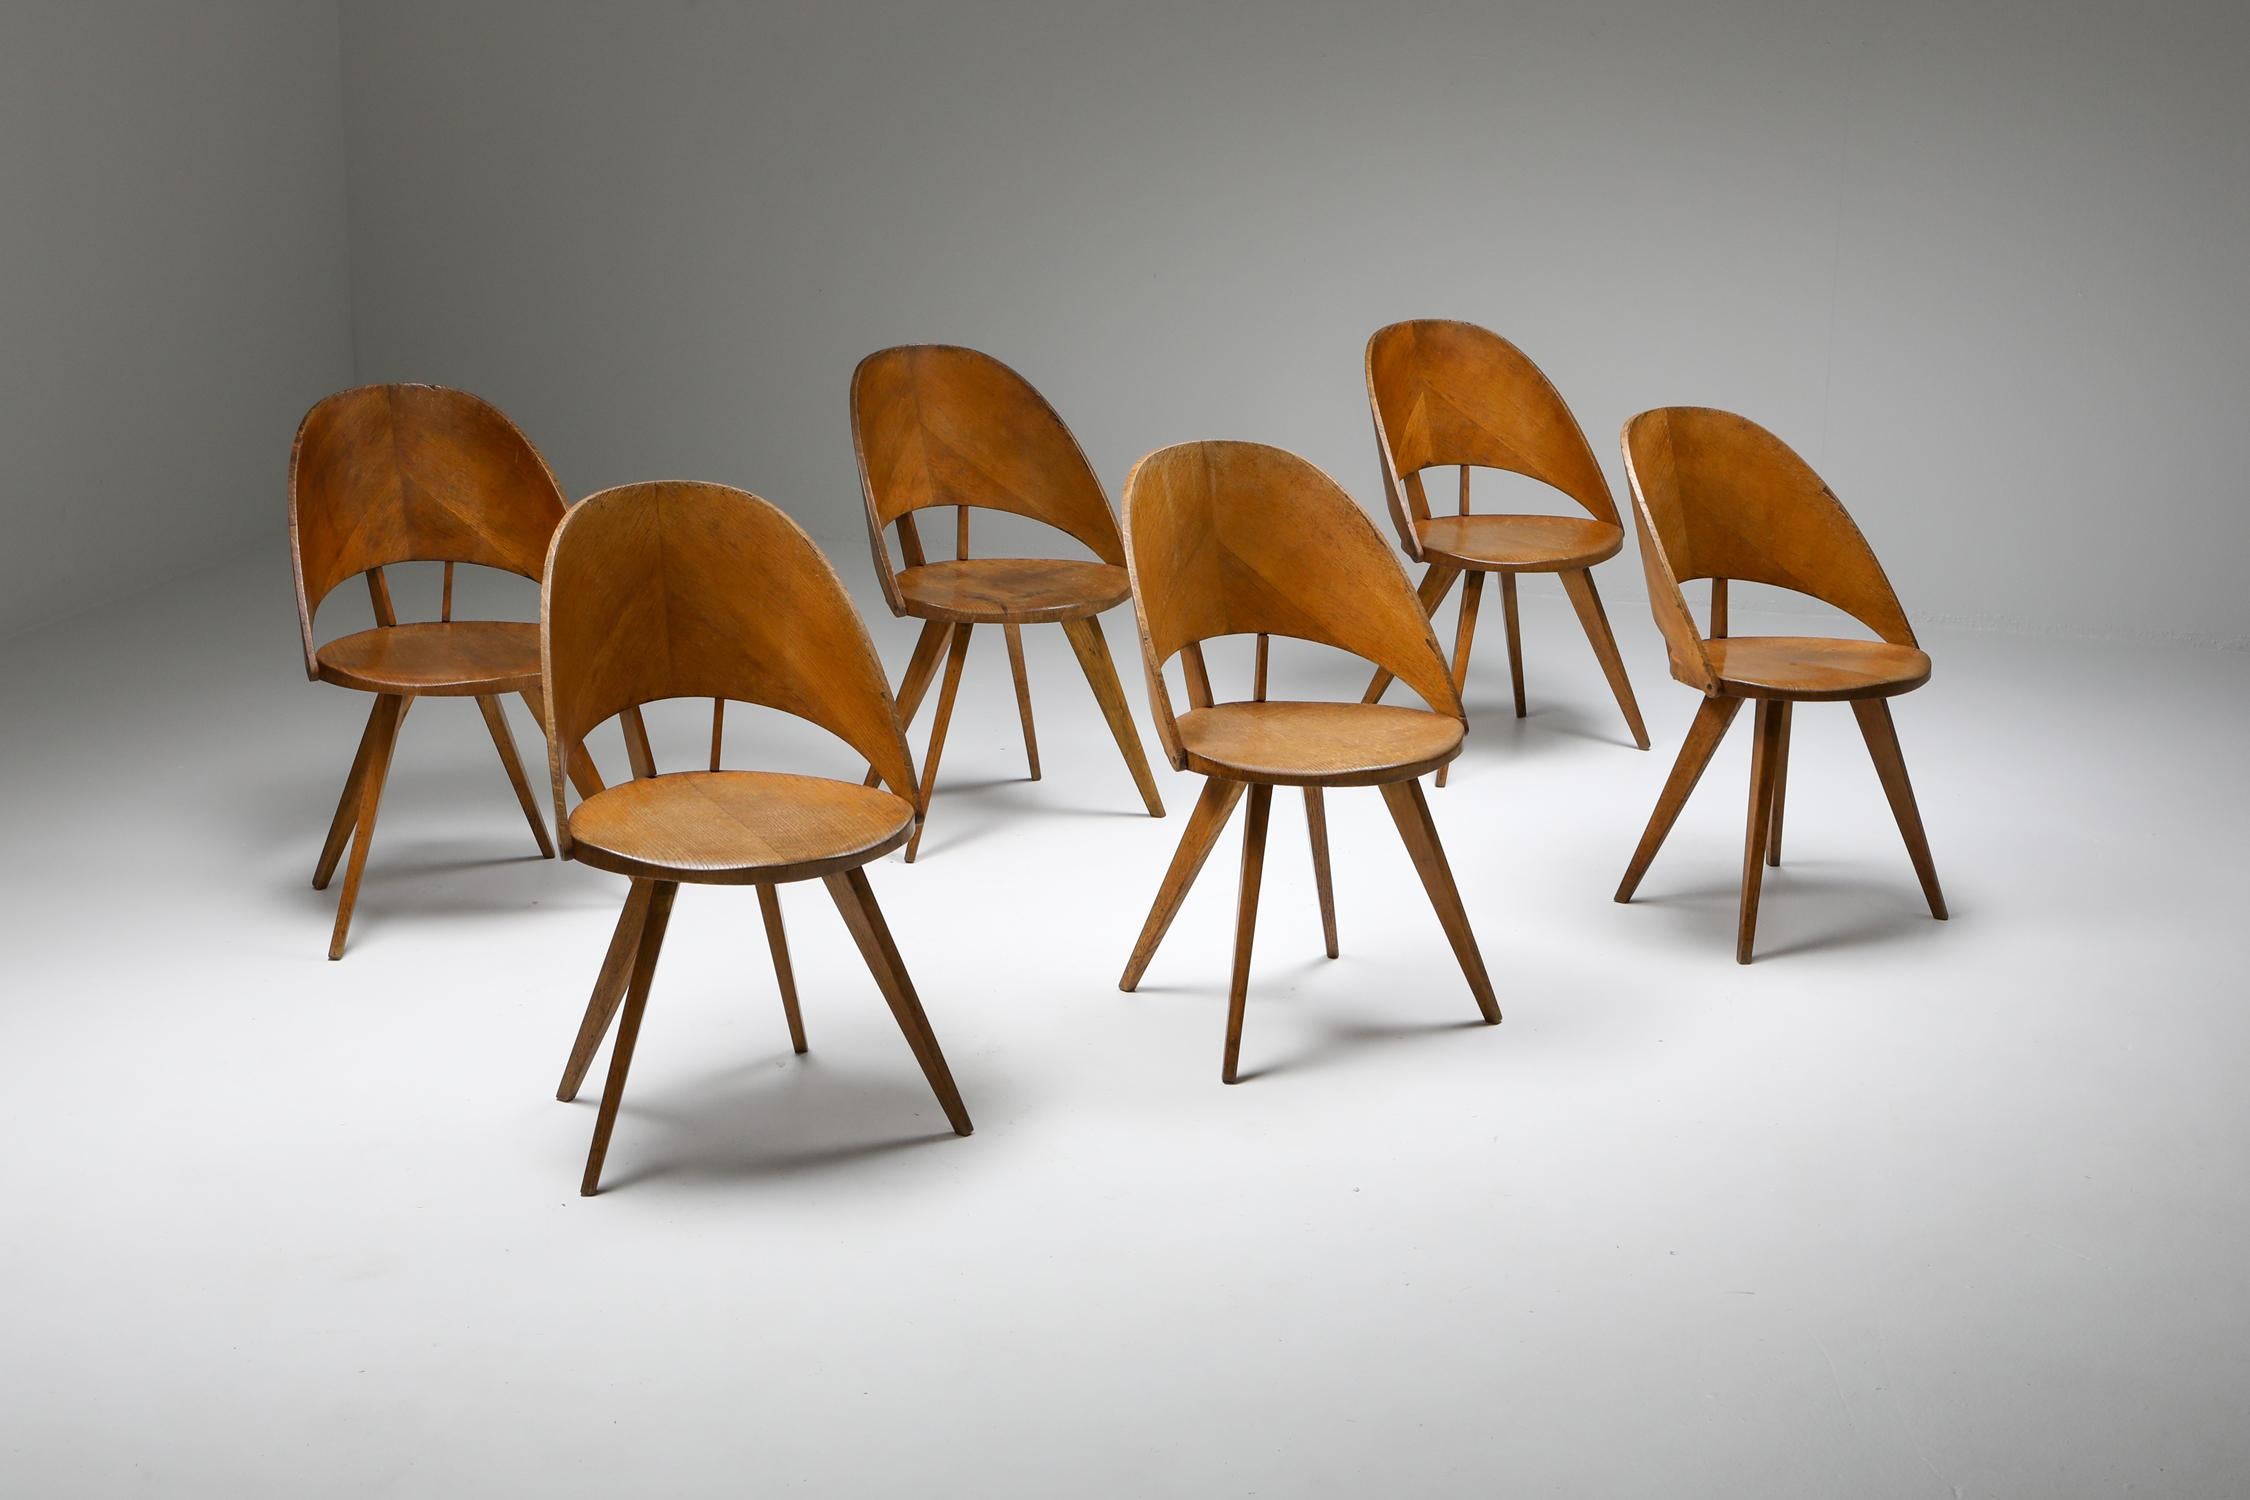 Italian Plywood Dining Chairs, 1940s In Good Condition For Sale In Antwerp, BE